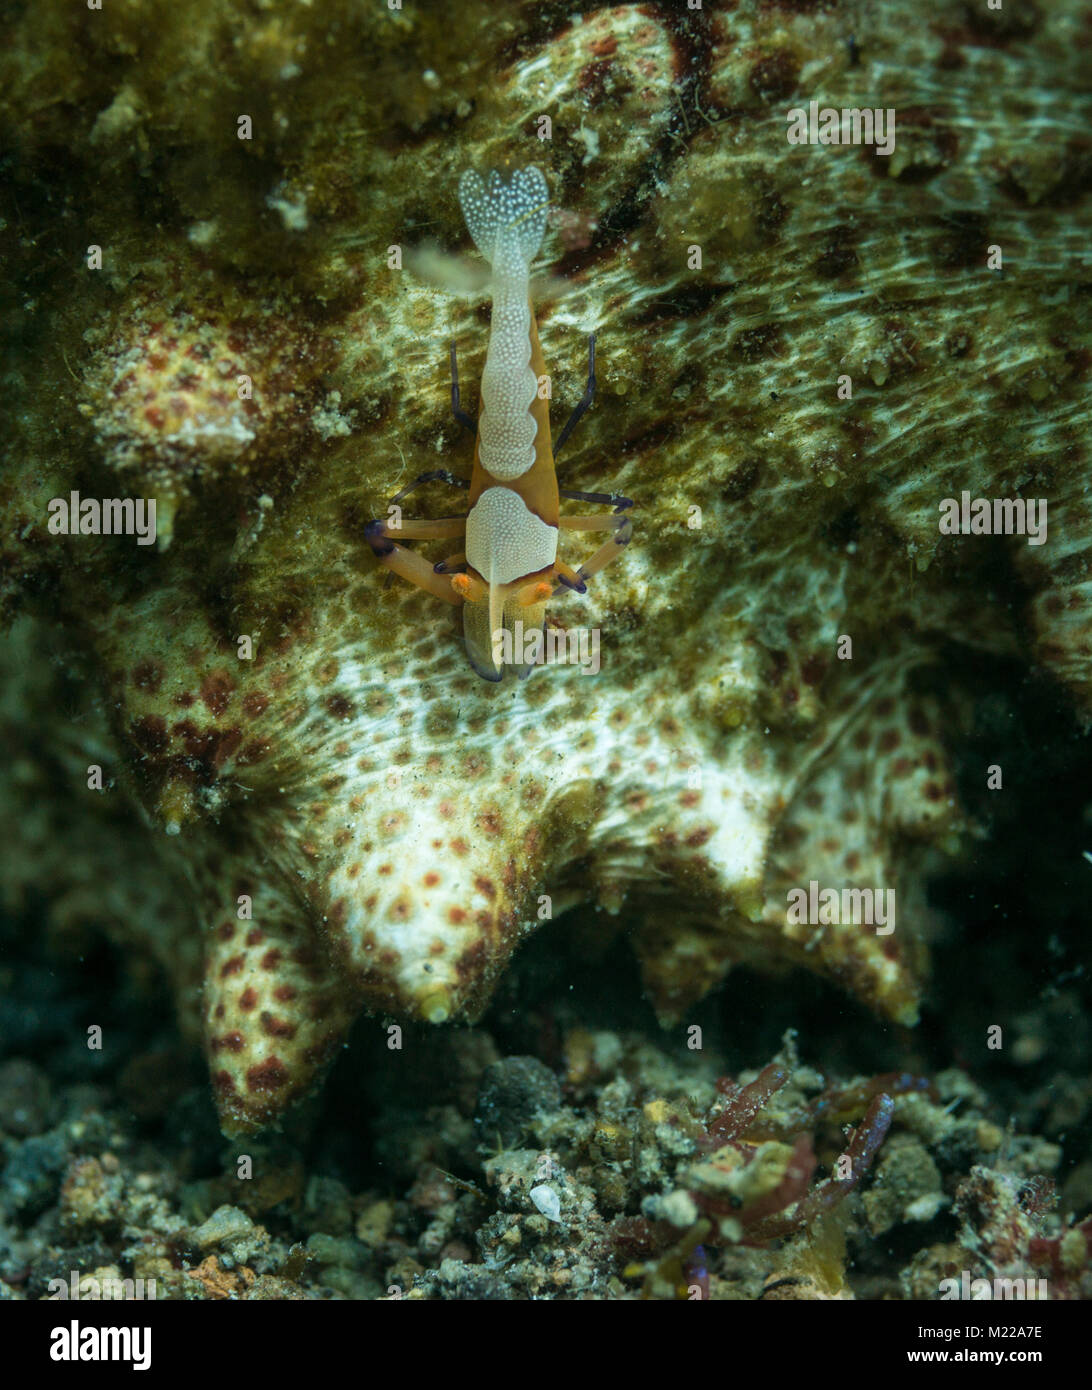 Emperor shirmp hitching a ride on a sea cucumber Stock Photo